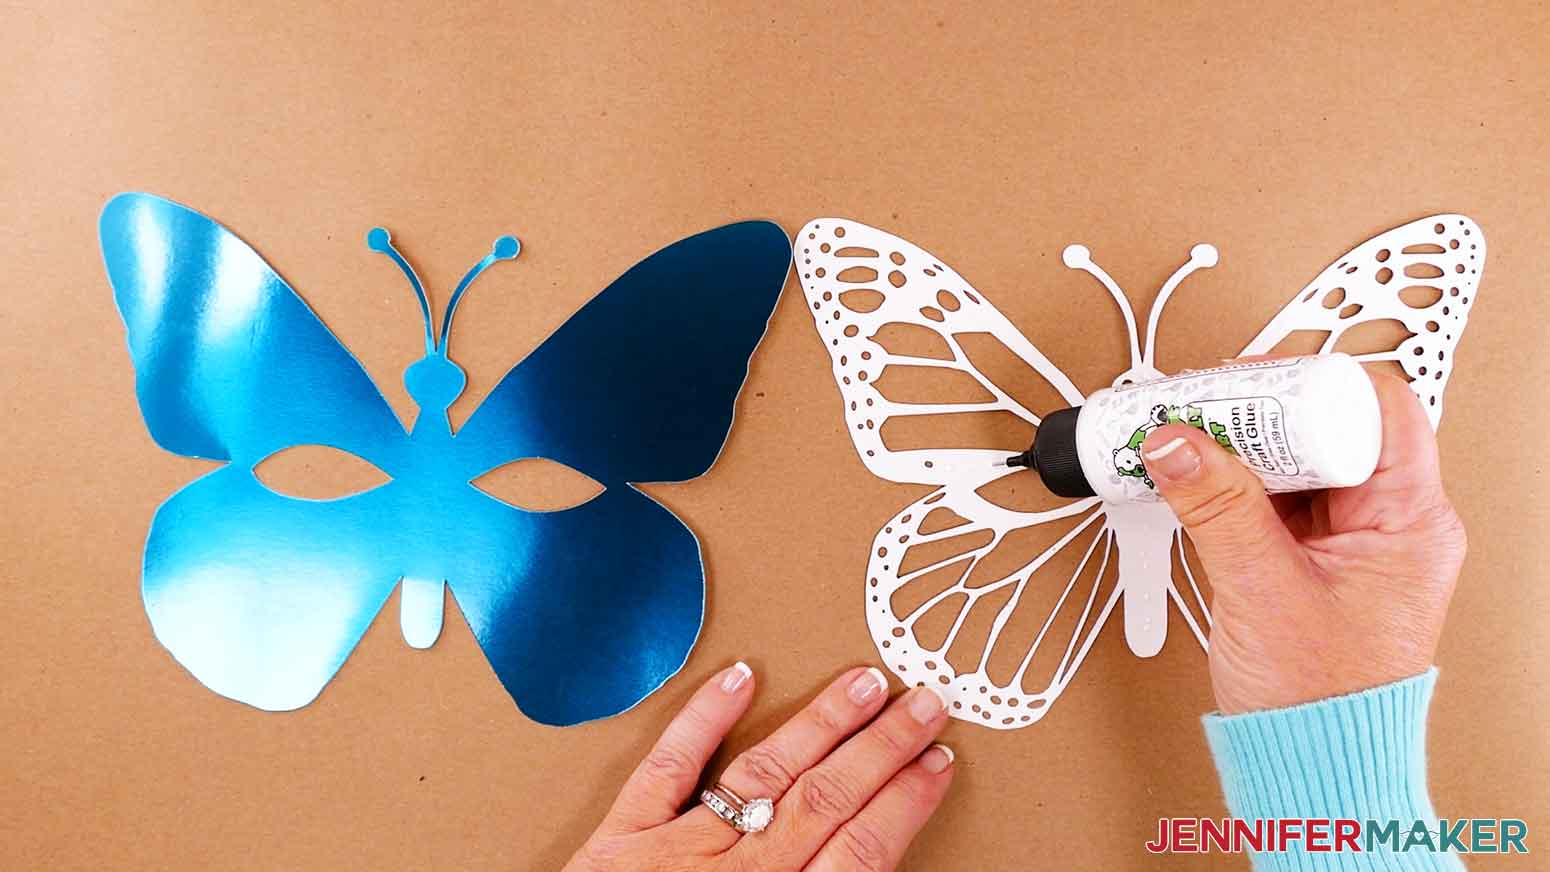 Apply craft glue to the back of the glitter cardstock for the butterfly mask design.